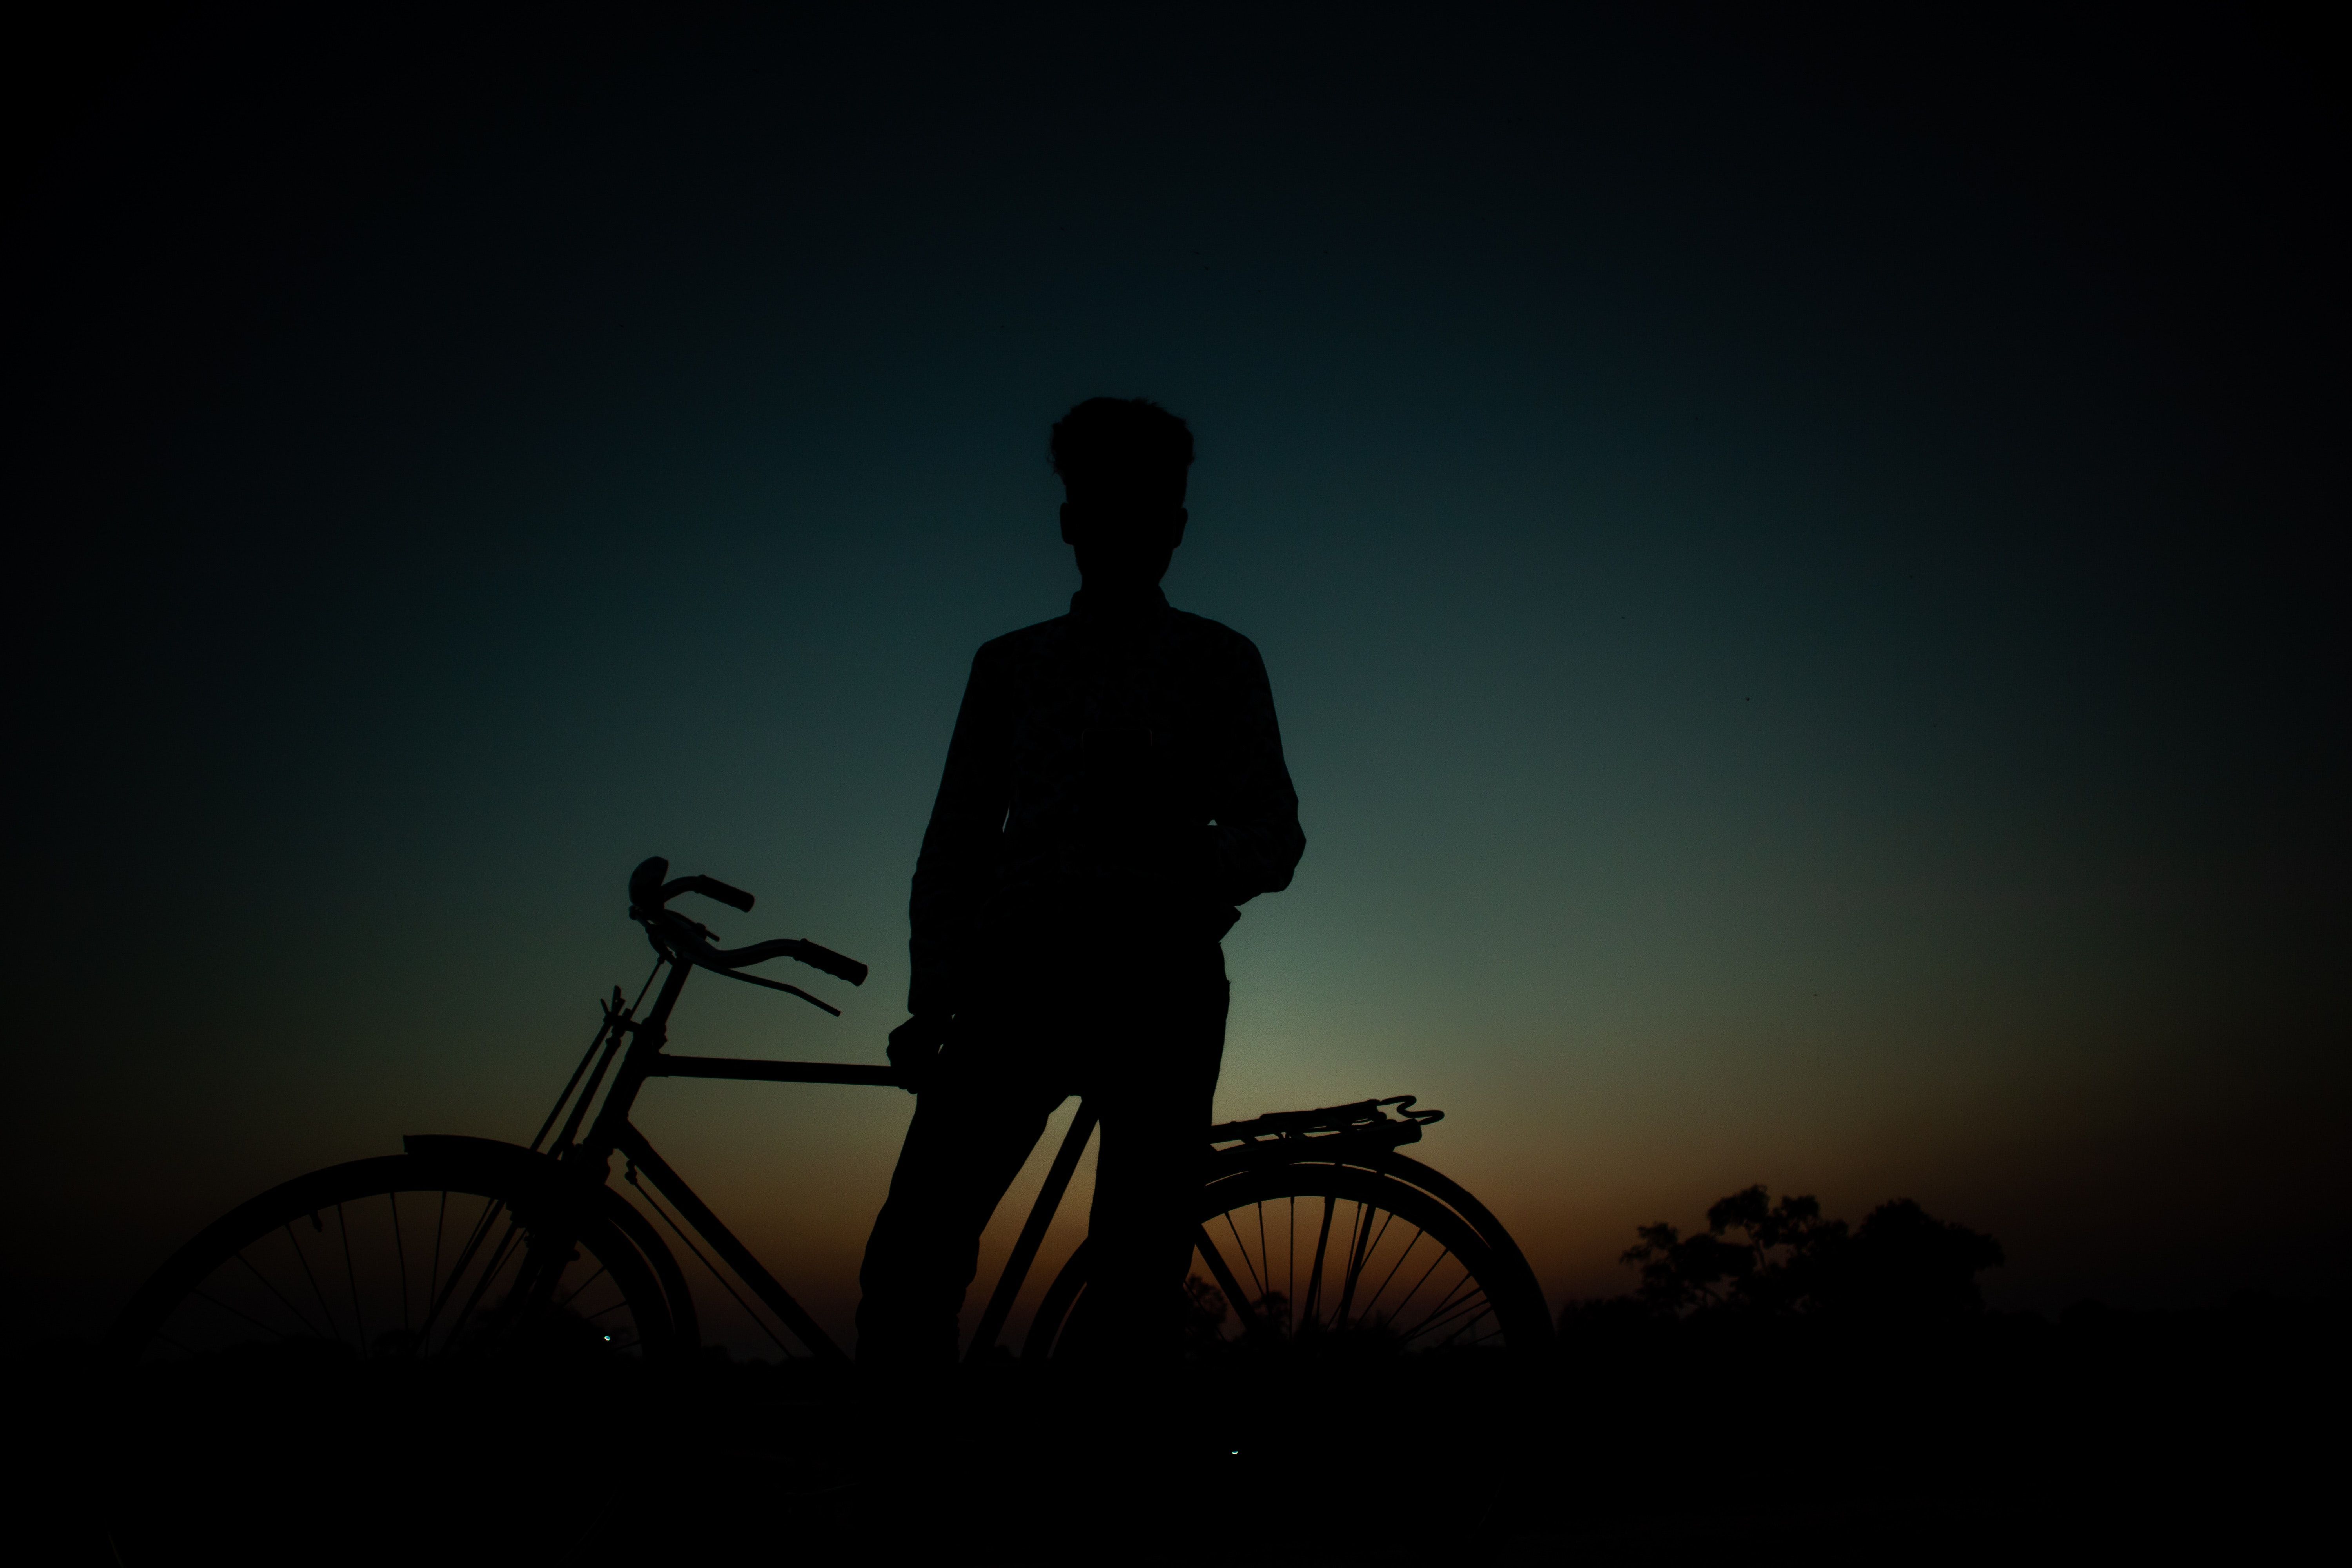 Free of bicycle, shadow, silhouette